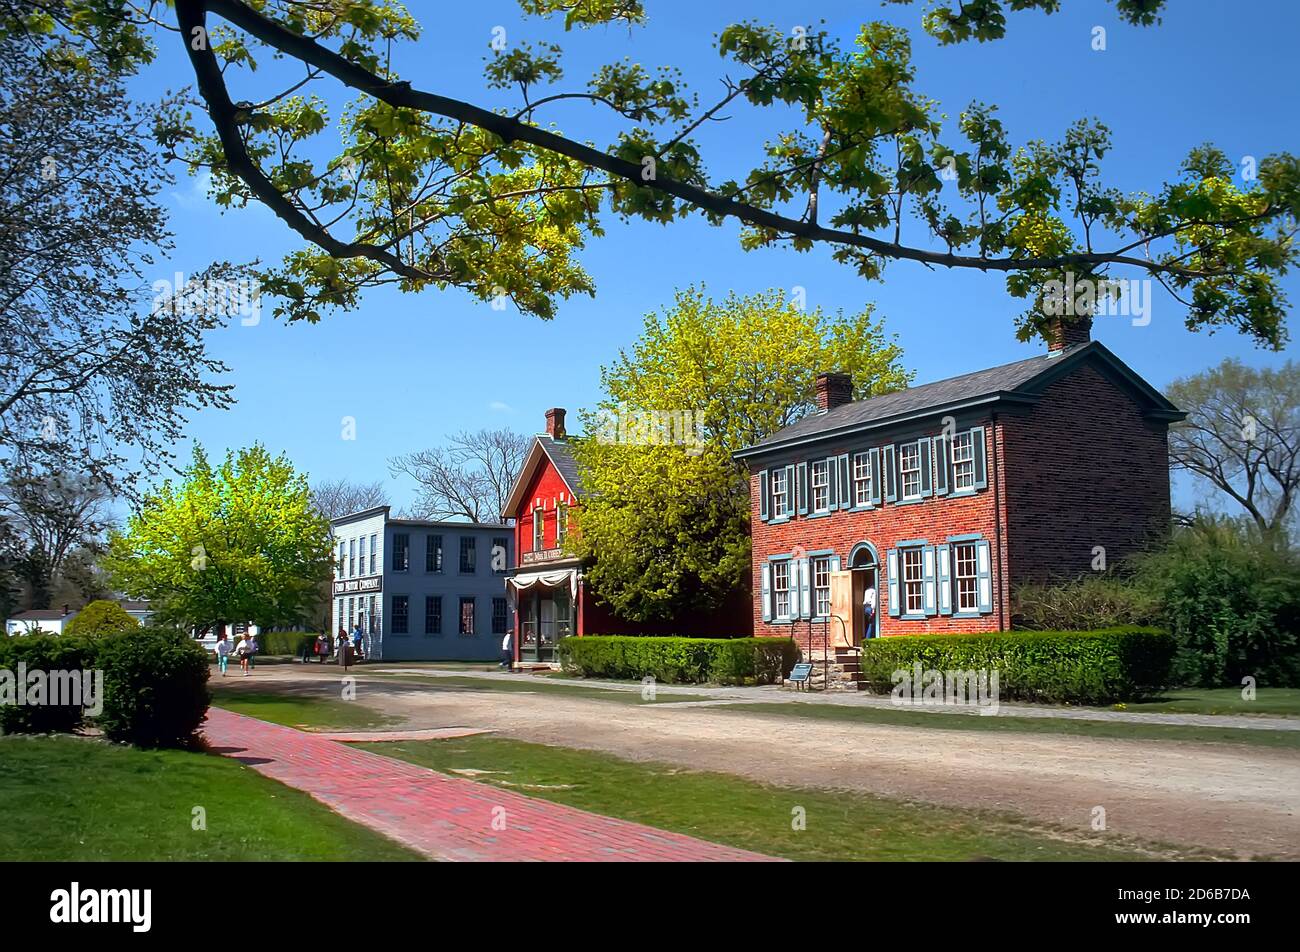 Henry Ford's Greenfield Village -Sprawling open-air history museum founded by Henry Ford with artifacts & homes of famous Americans. Dearborn, Michigan Stock Photo